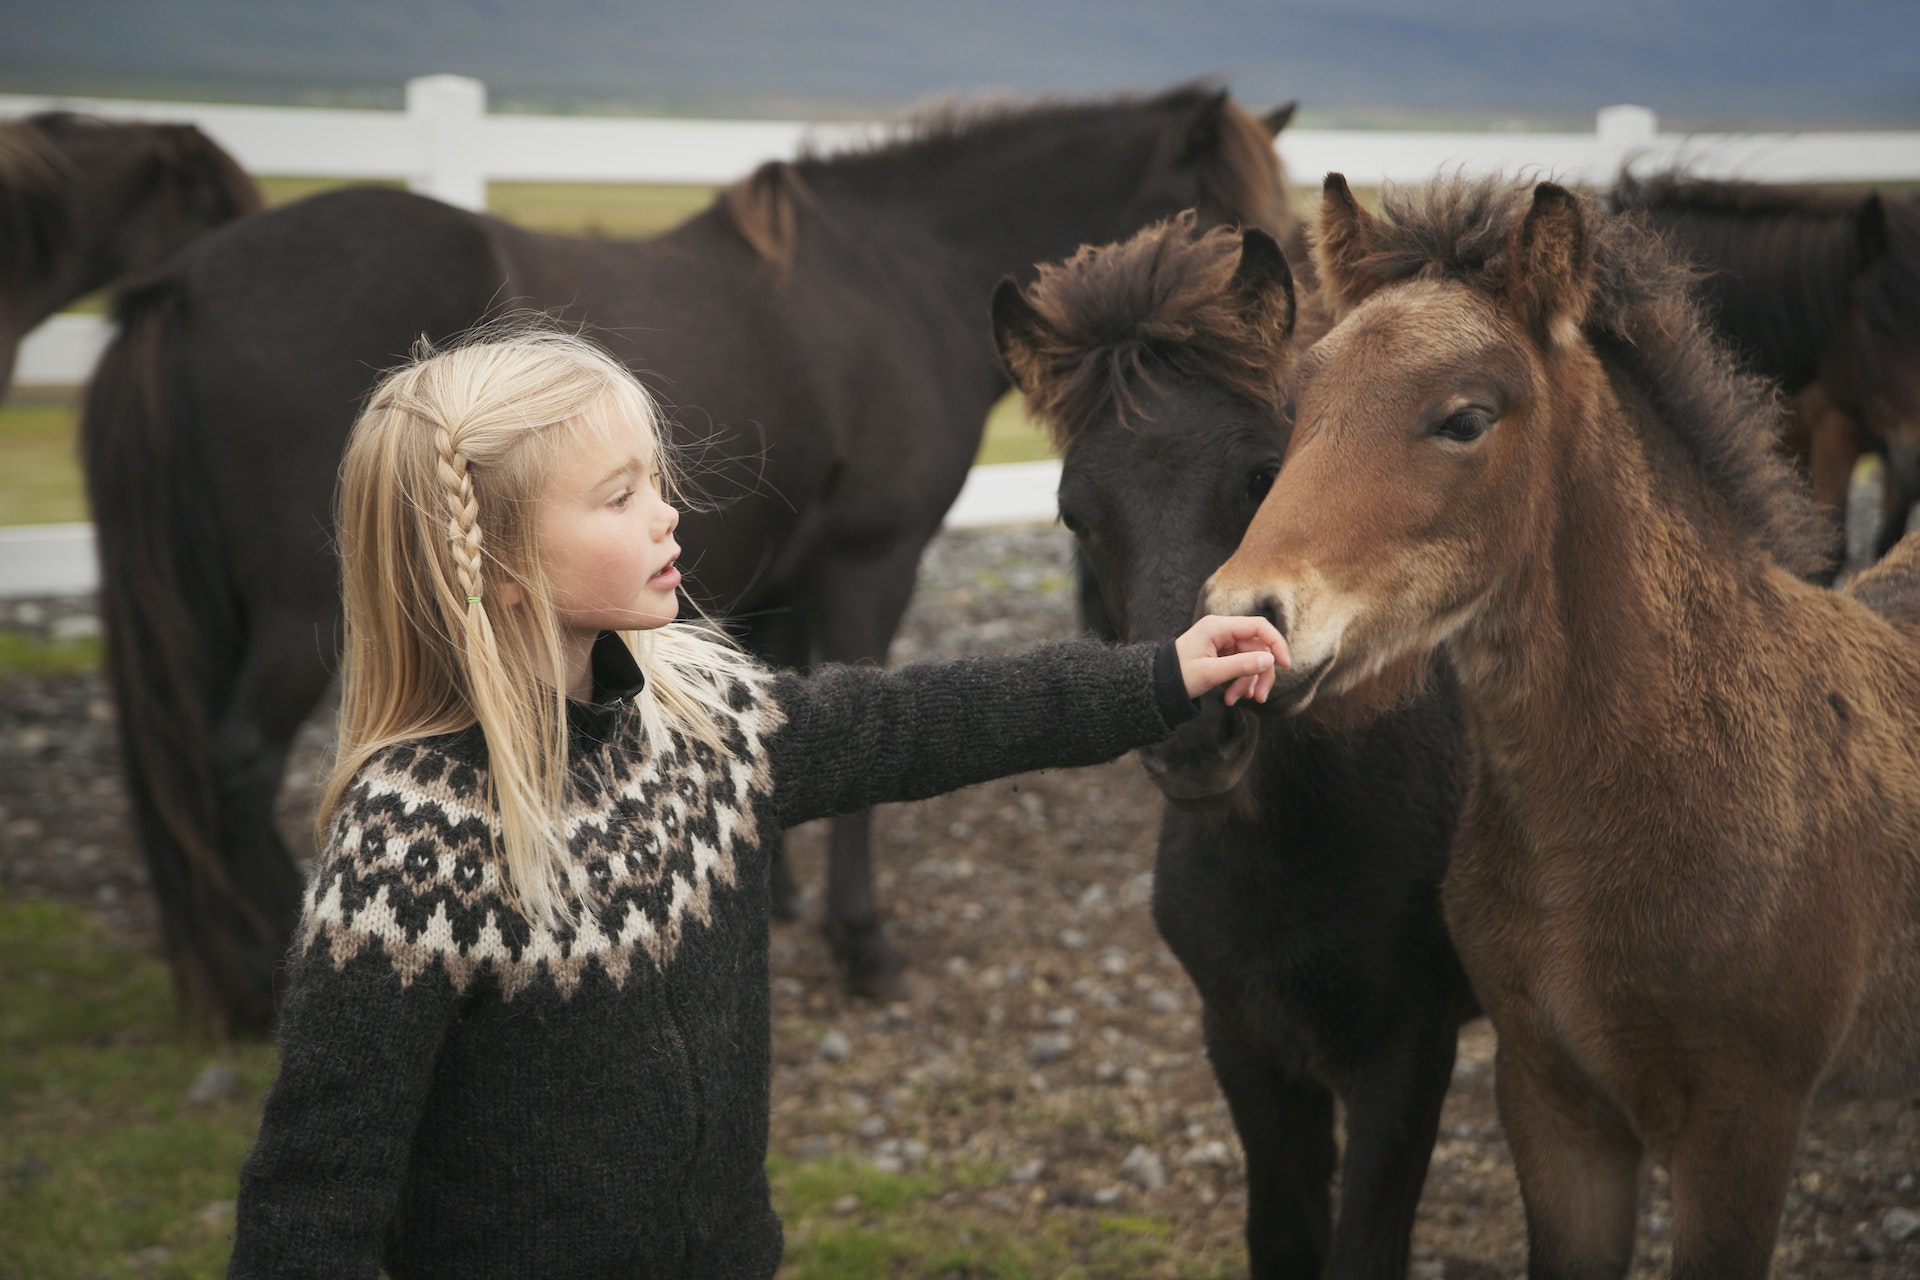 Blond Icelandic girl in traditional woollen sweater in a field with Icelandic horses, Flugumyri stables, Skagafjordur, Iceland